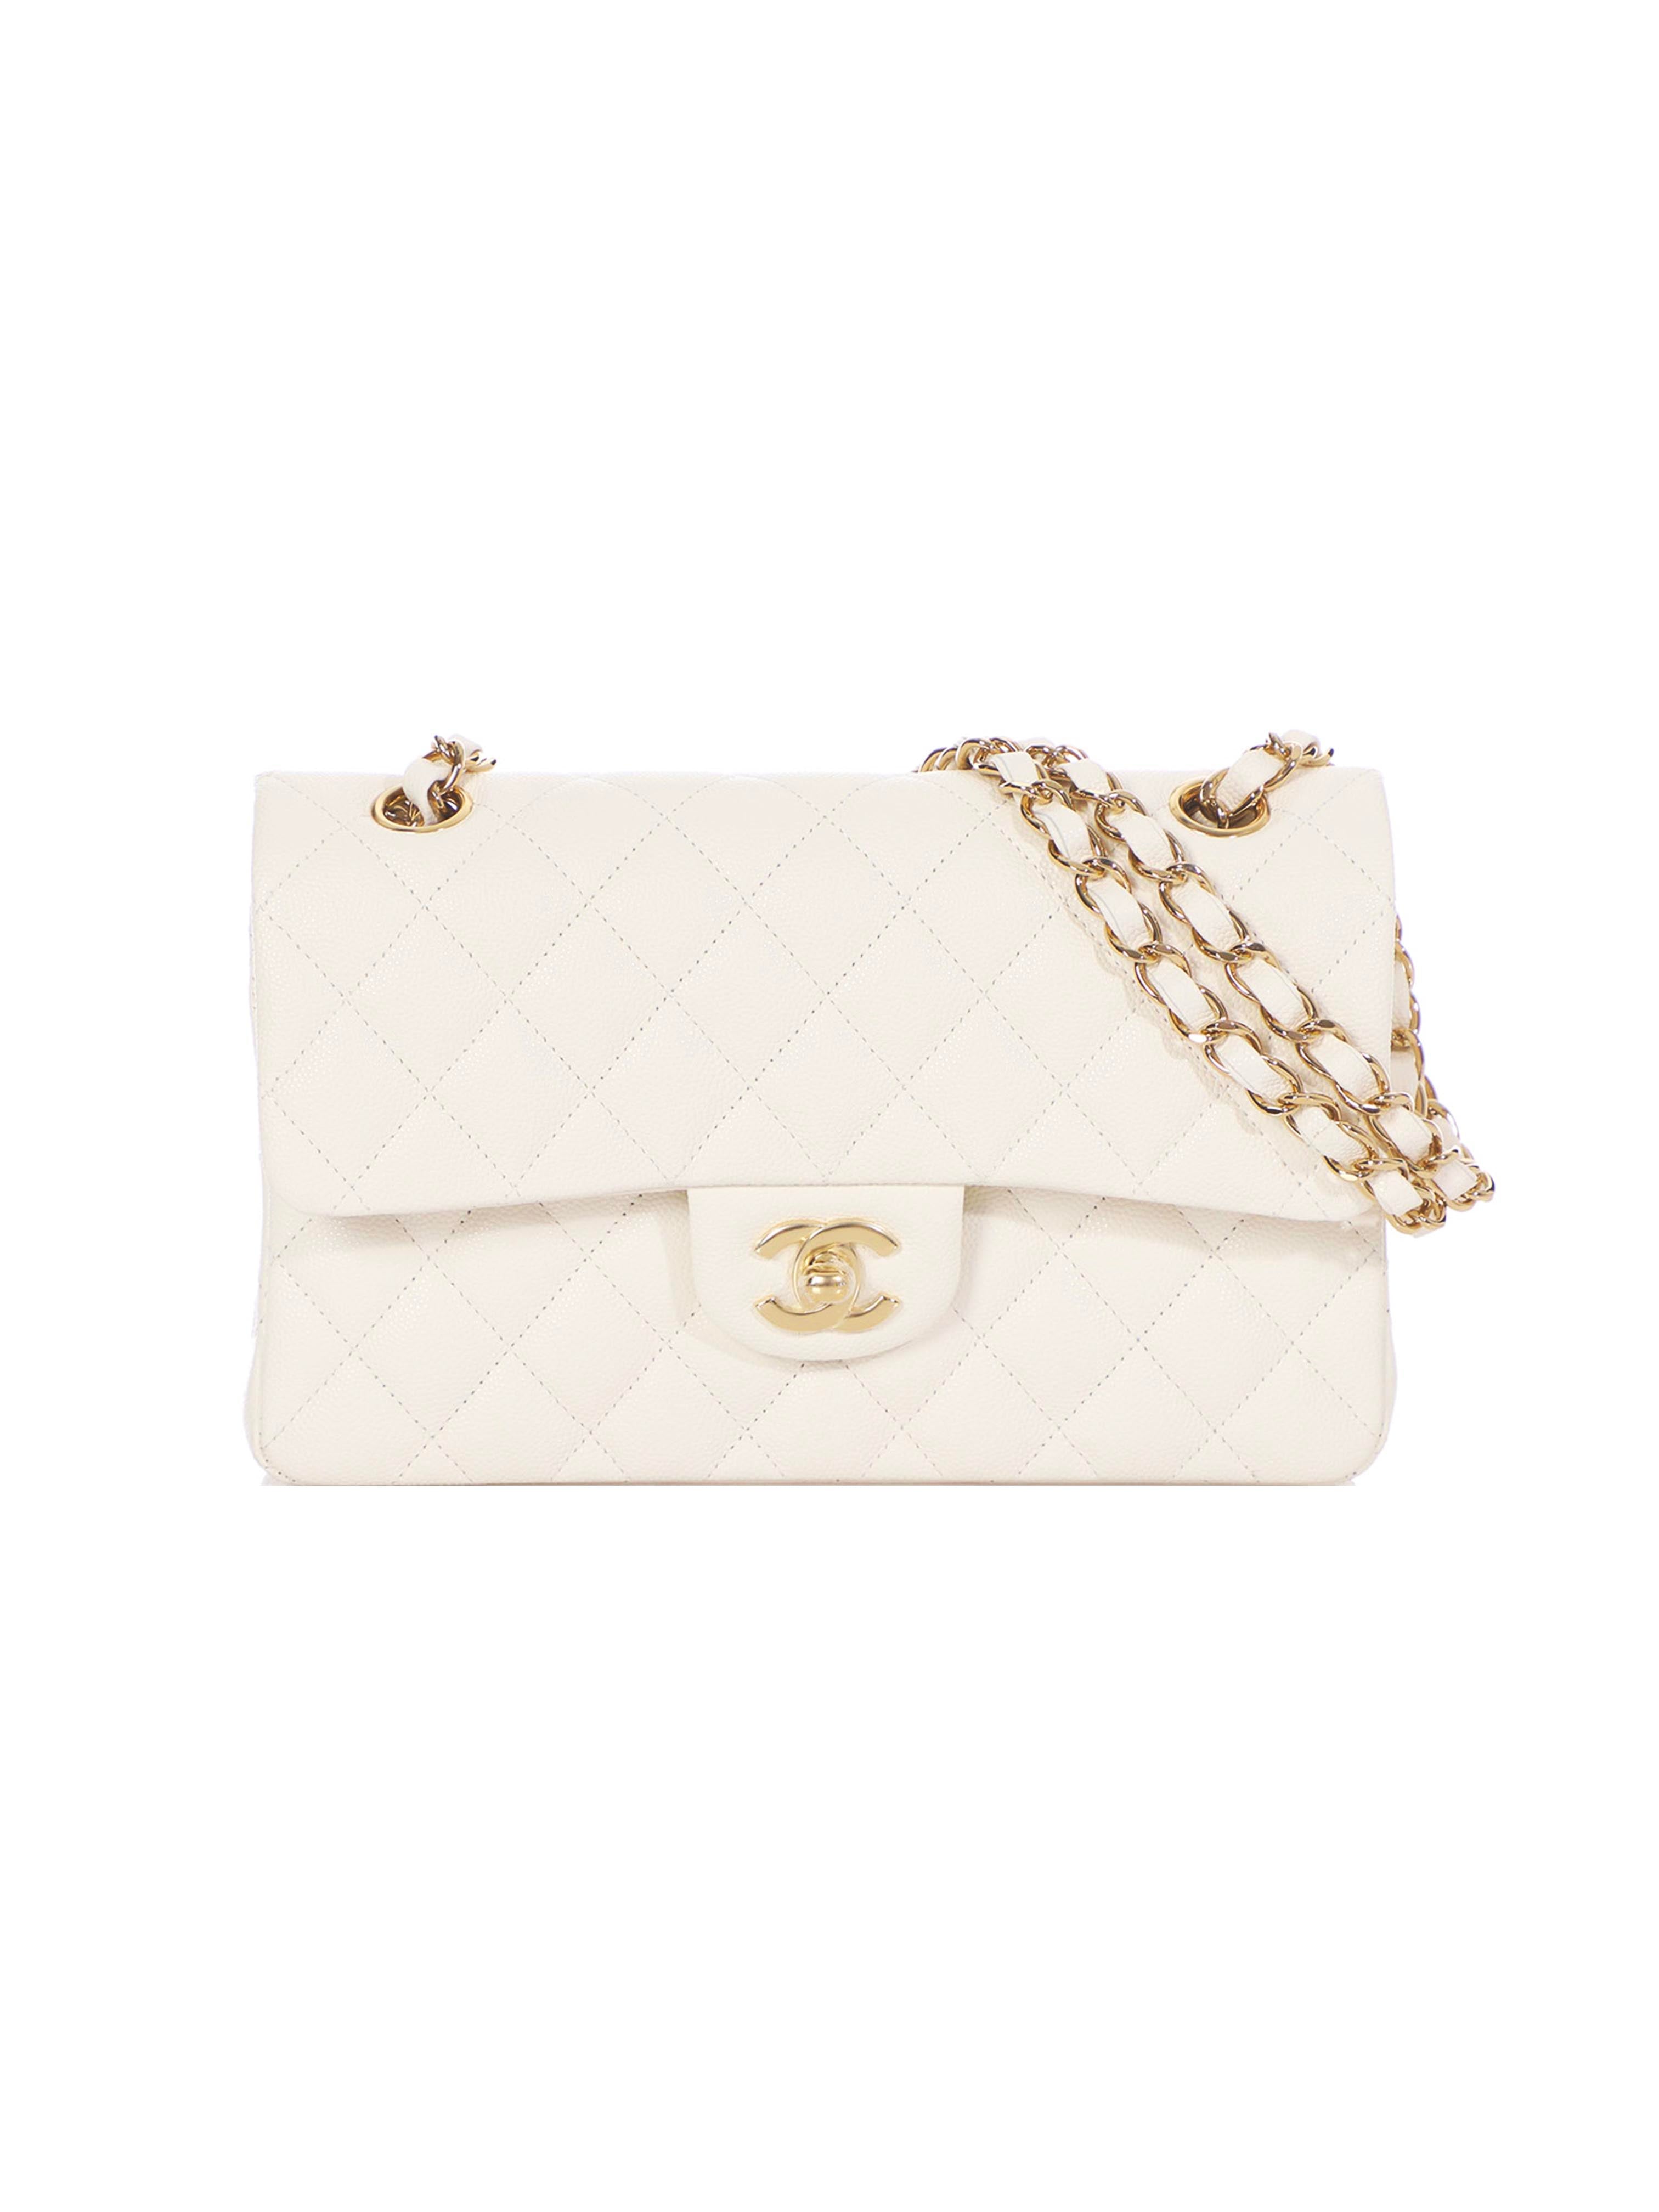 [In Search Of] White Caviar Classic Medium Double Flap w/GHW